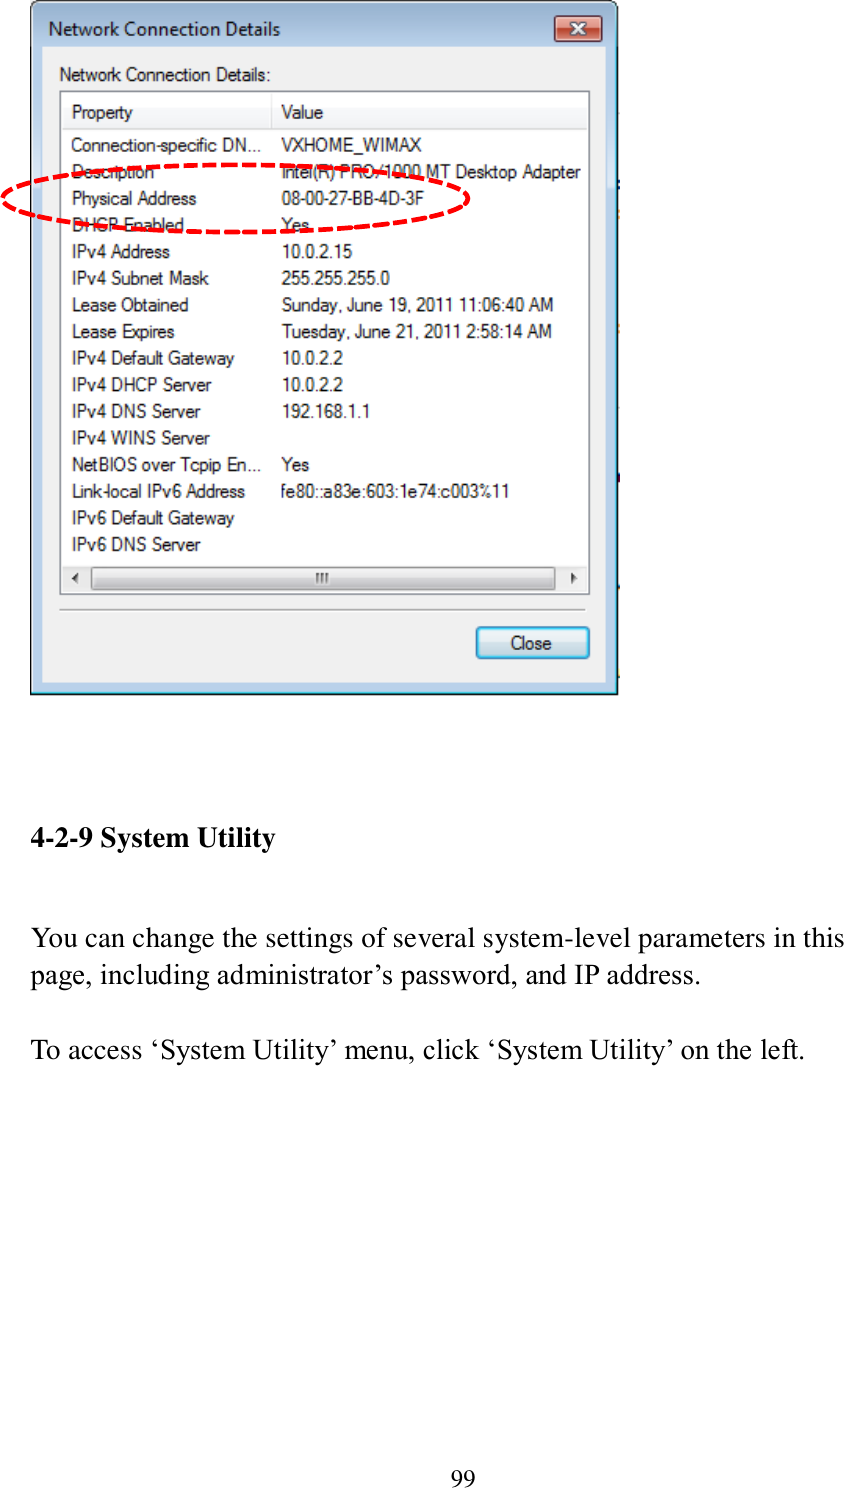 99     4-2-9 System Utility  You can change the settings of several system-level parameters in this page, including administrator’s password, and IP address.  To access ‘System Utility’ menu, click ‘System Utility’ on the left.  